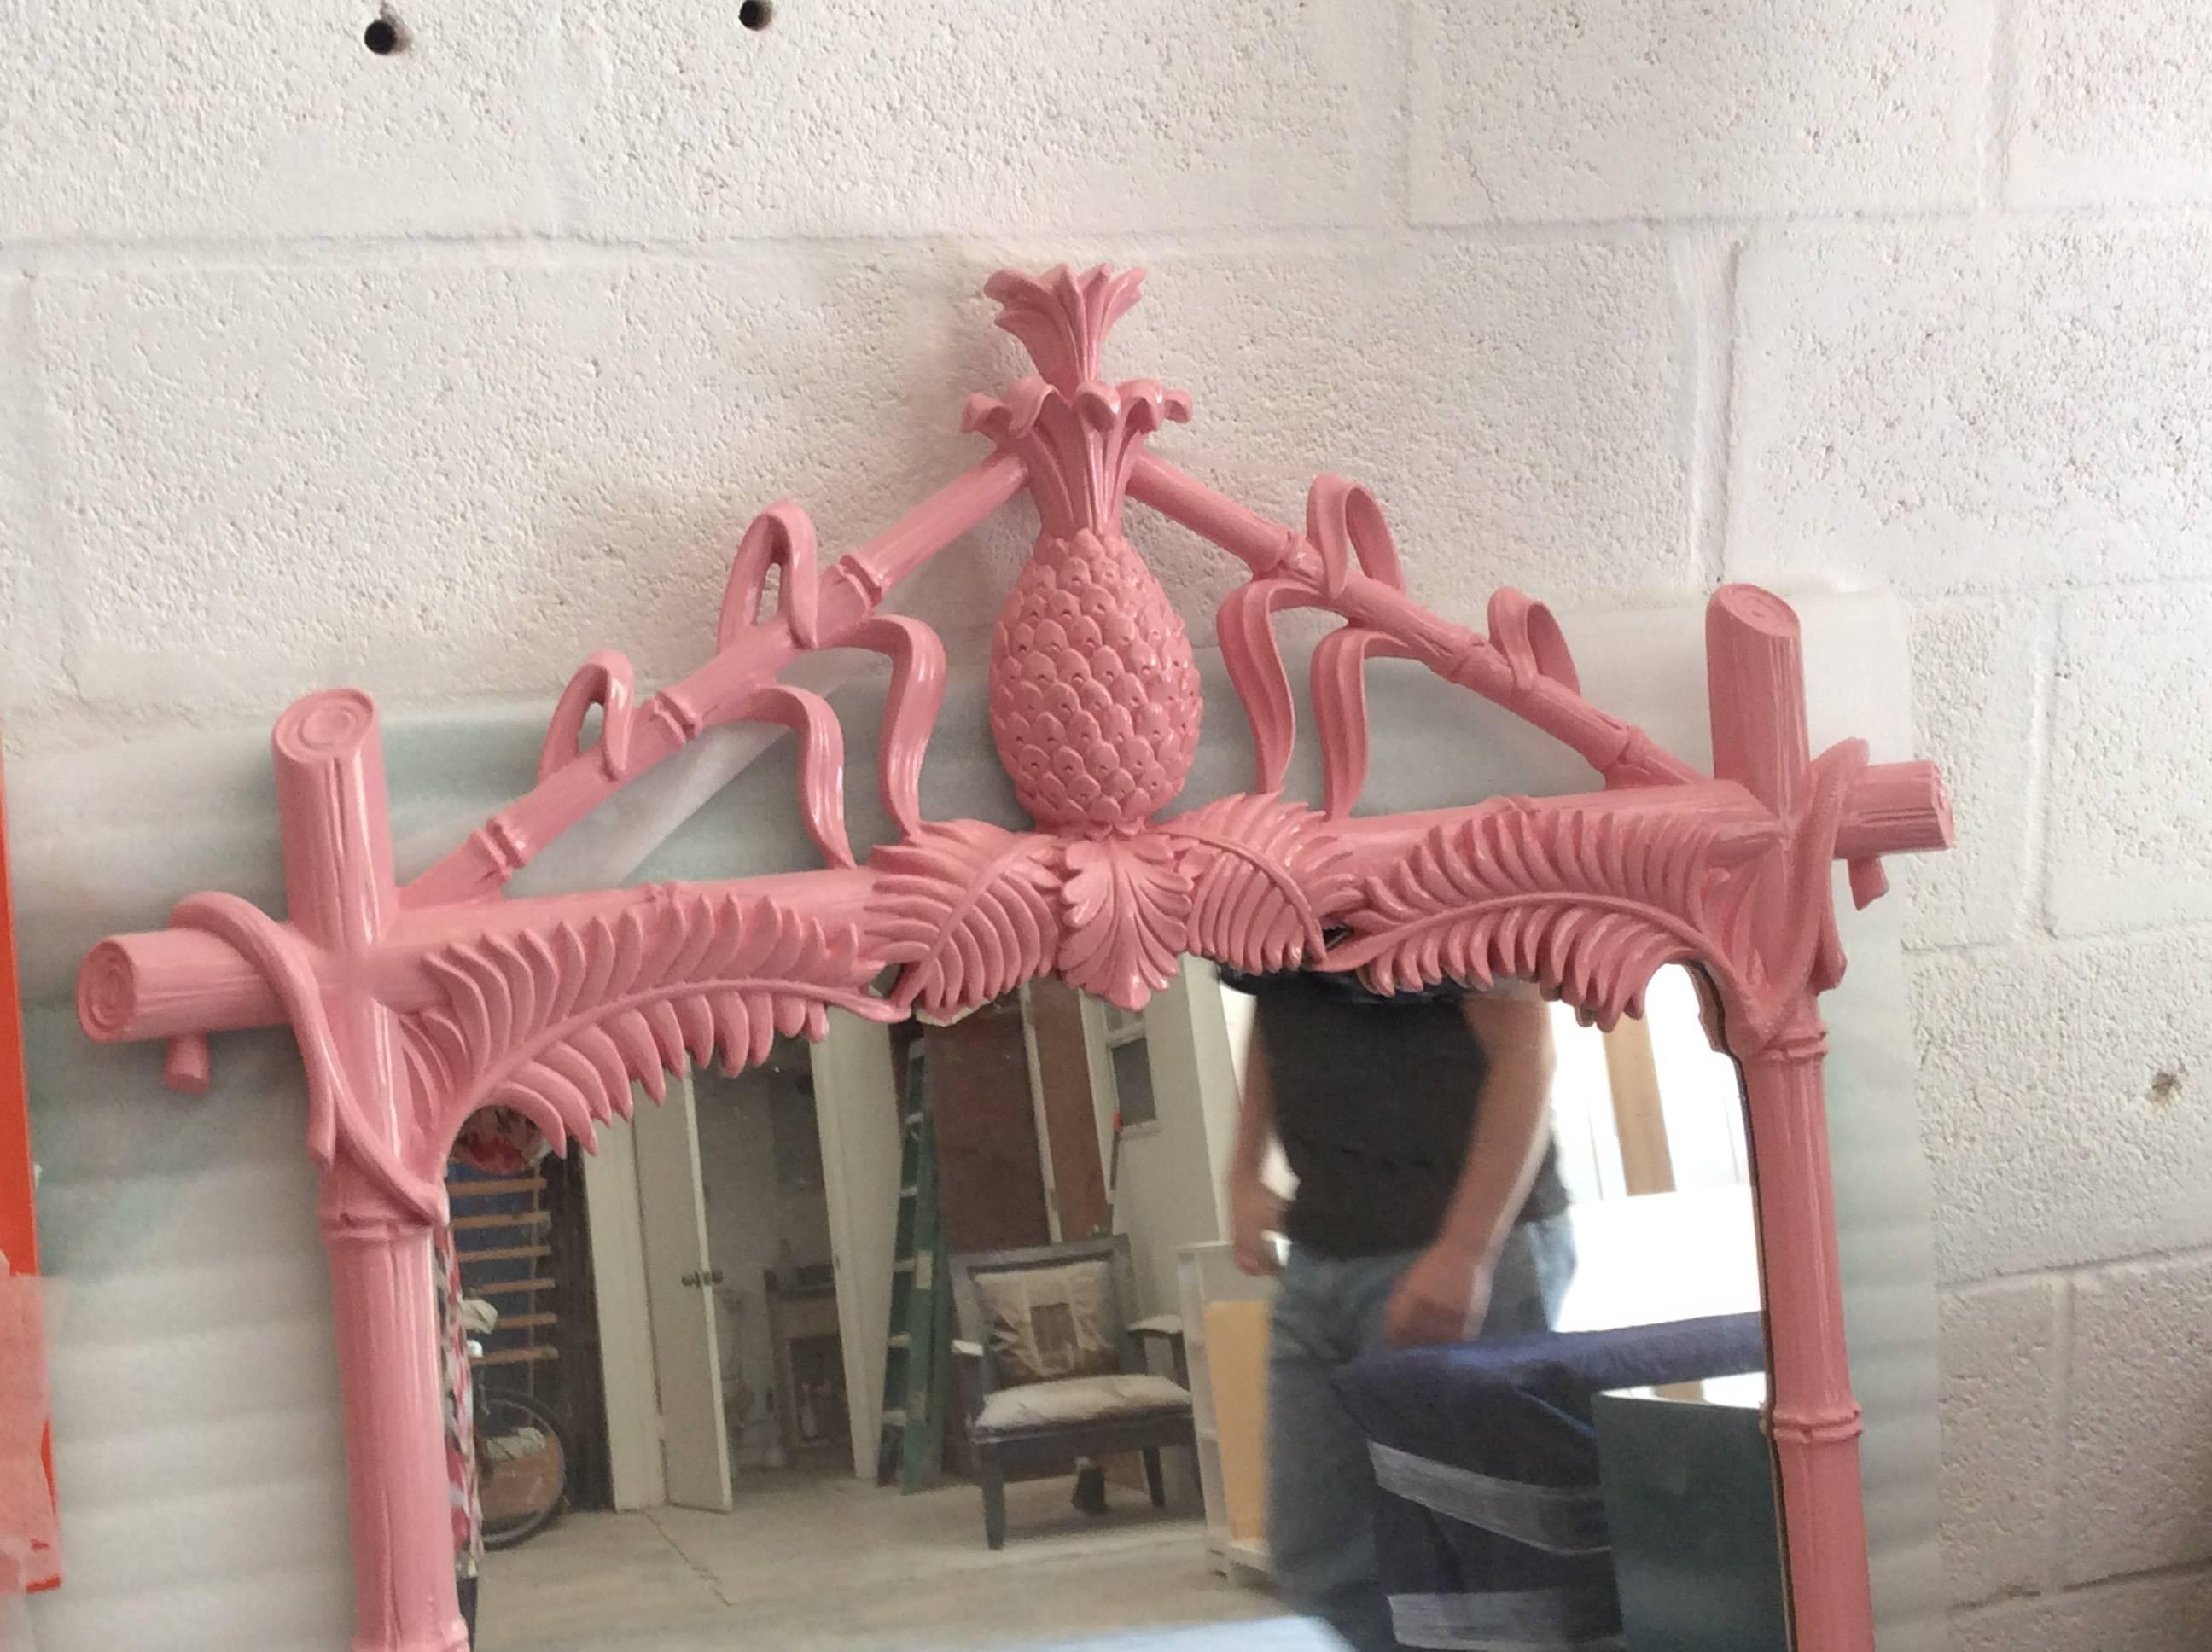 The most amazing vintage Hollywood Regency, chinoiserie wall mirror by Gampel & Stoll newly lacquered in a flamingo pink color. Faux bamboo, Chinese Chippendale, pineapple top and palm frond leaves add to the tropical Palm Beach, Lily Pulitzer